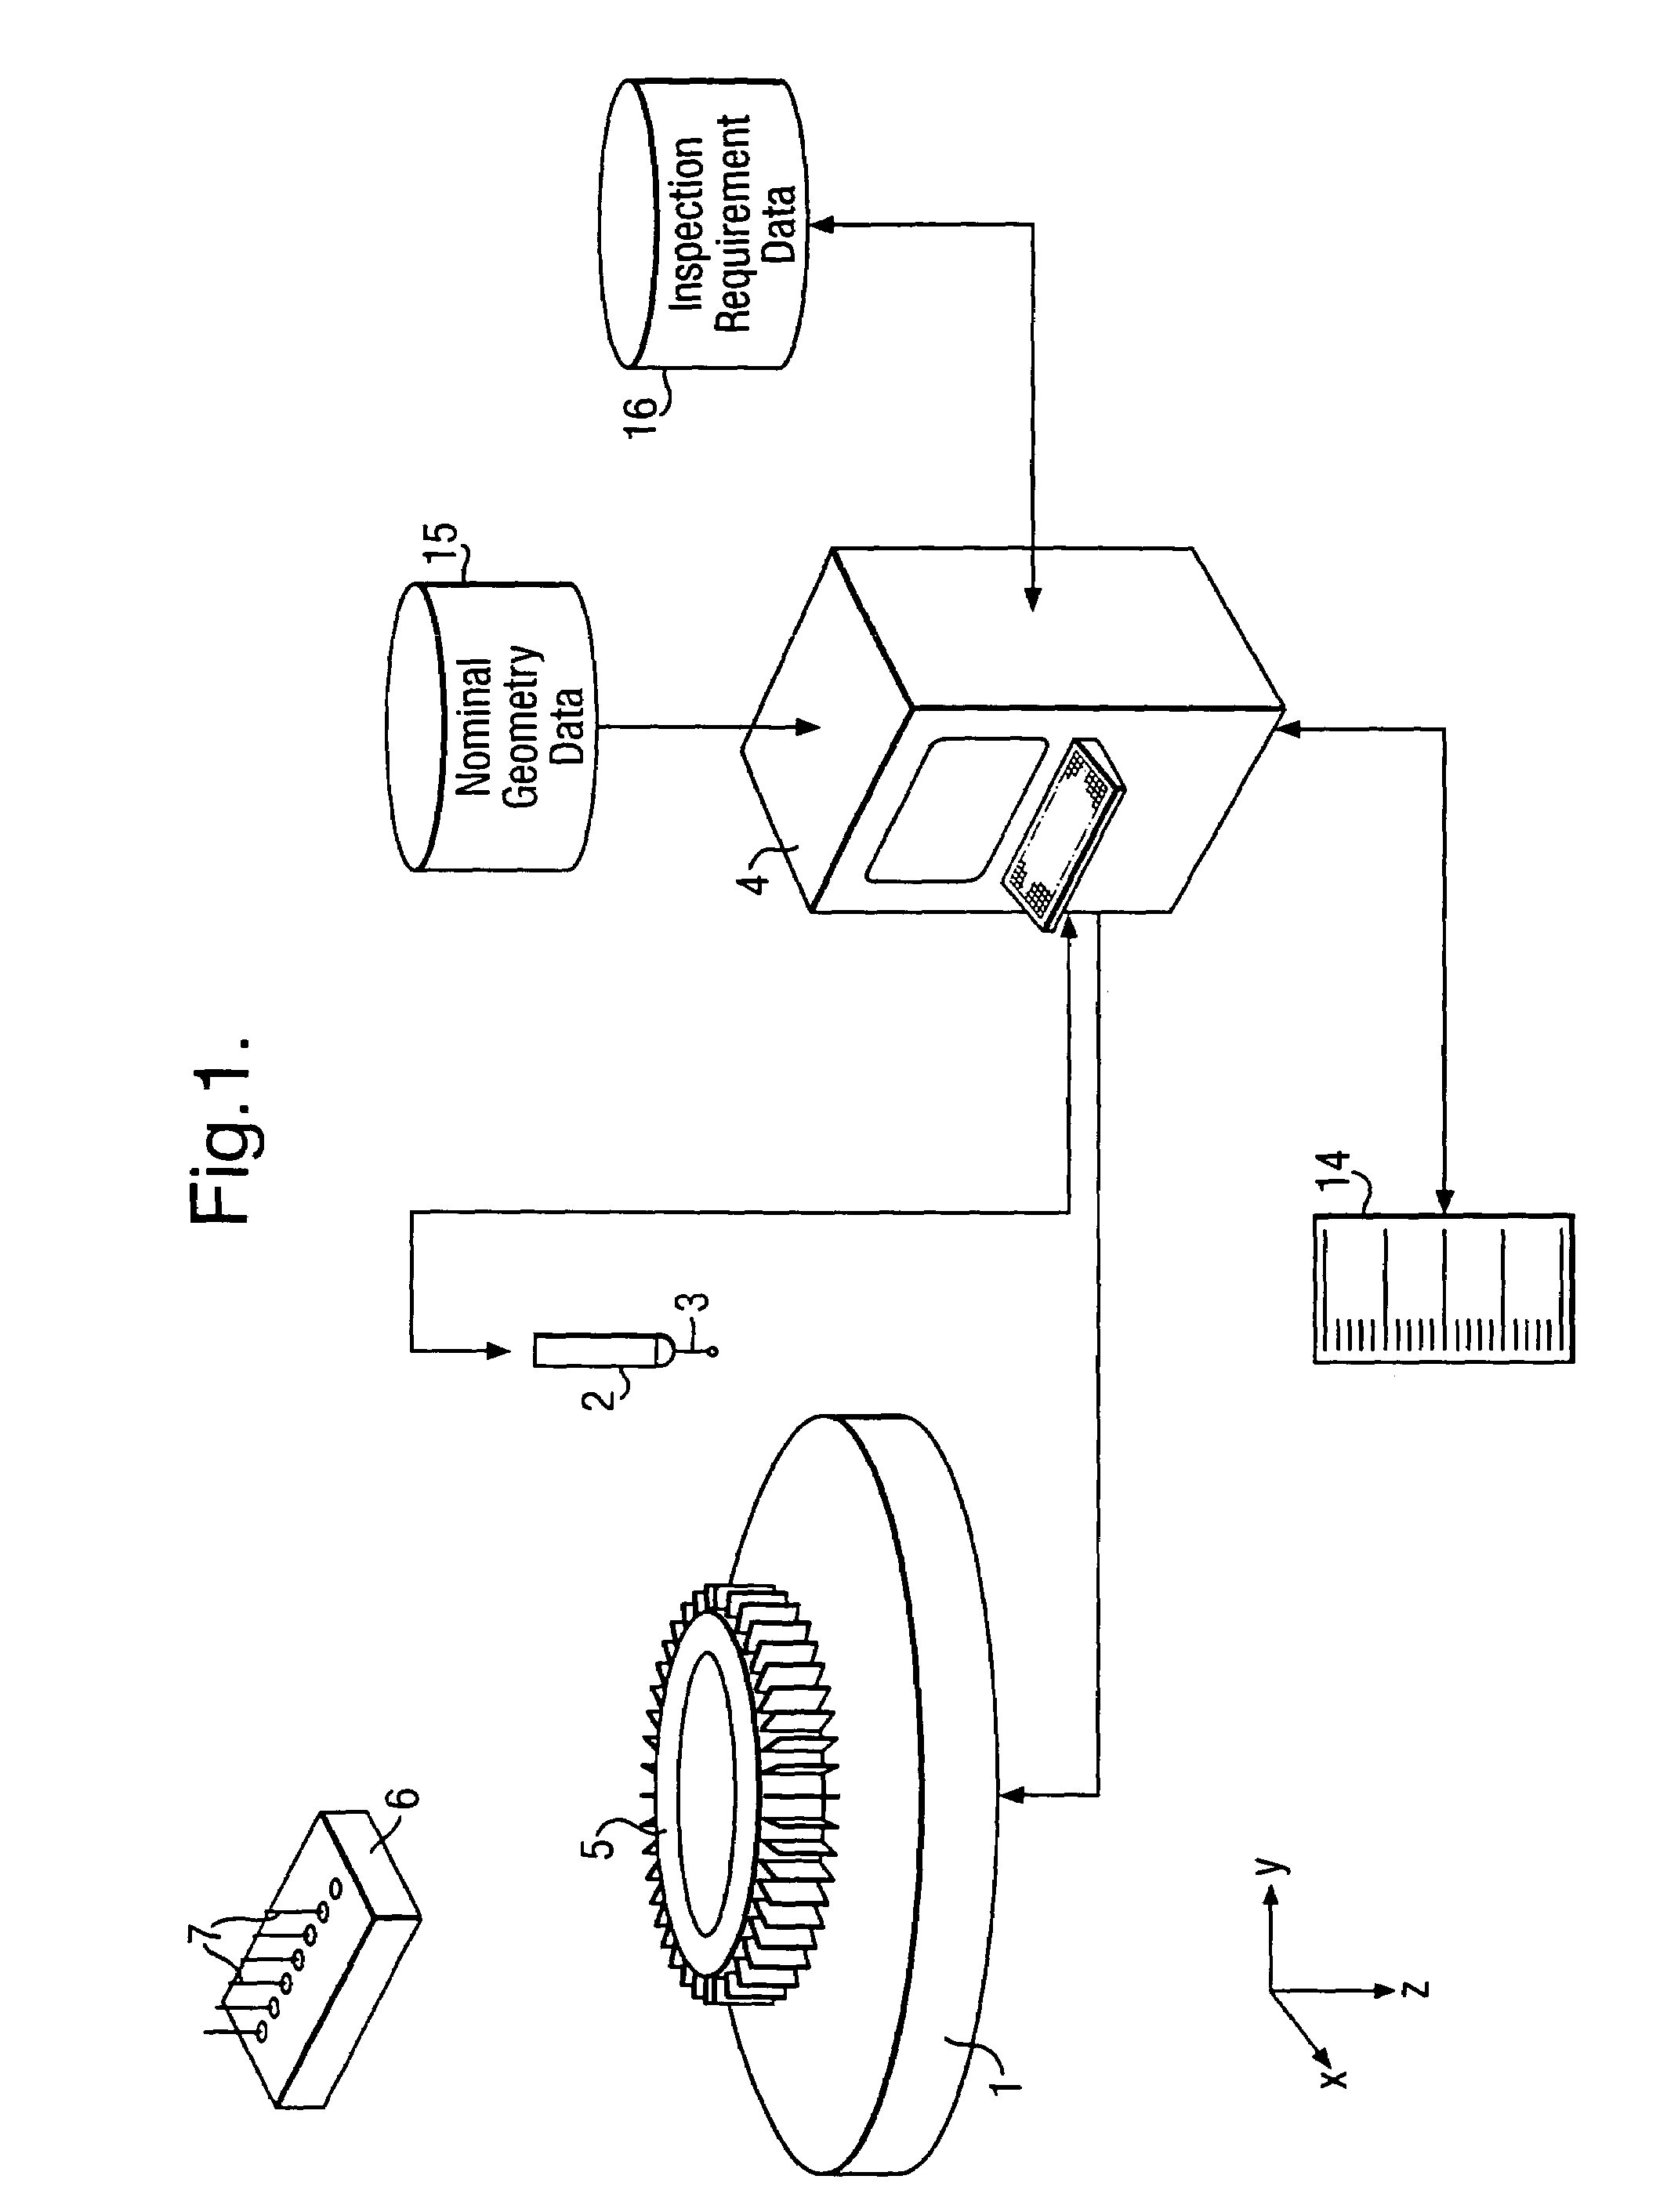 Method of generating an inspection program and method of generating a visual display